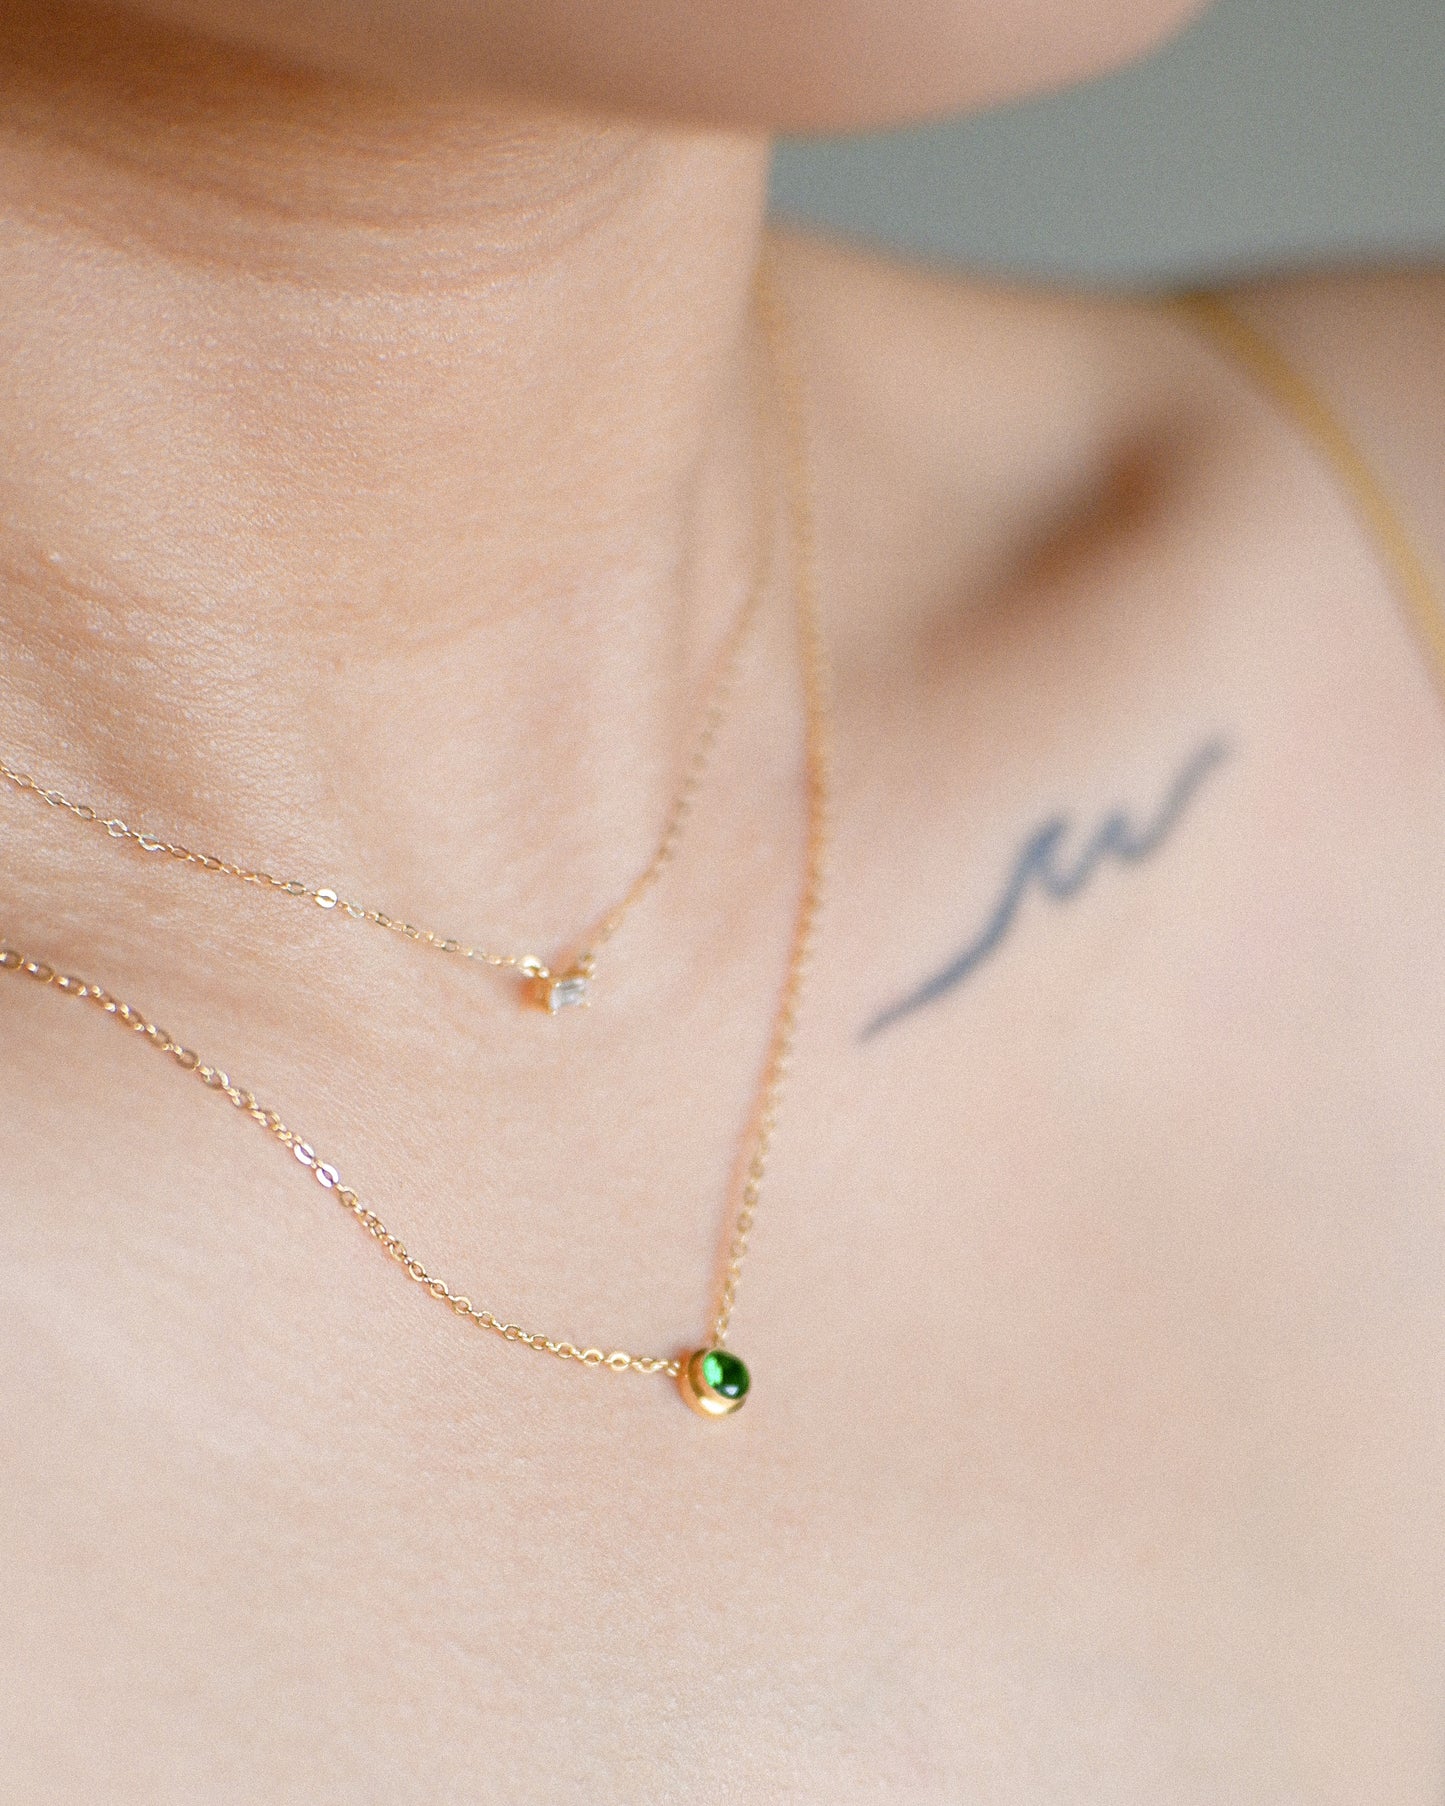 The Emerald Solitaire Necklace